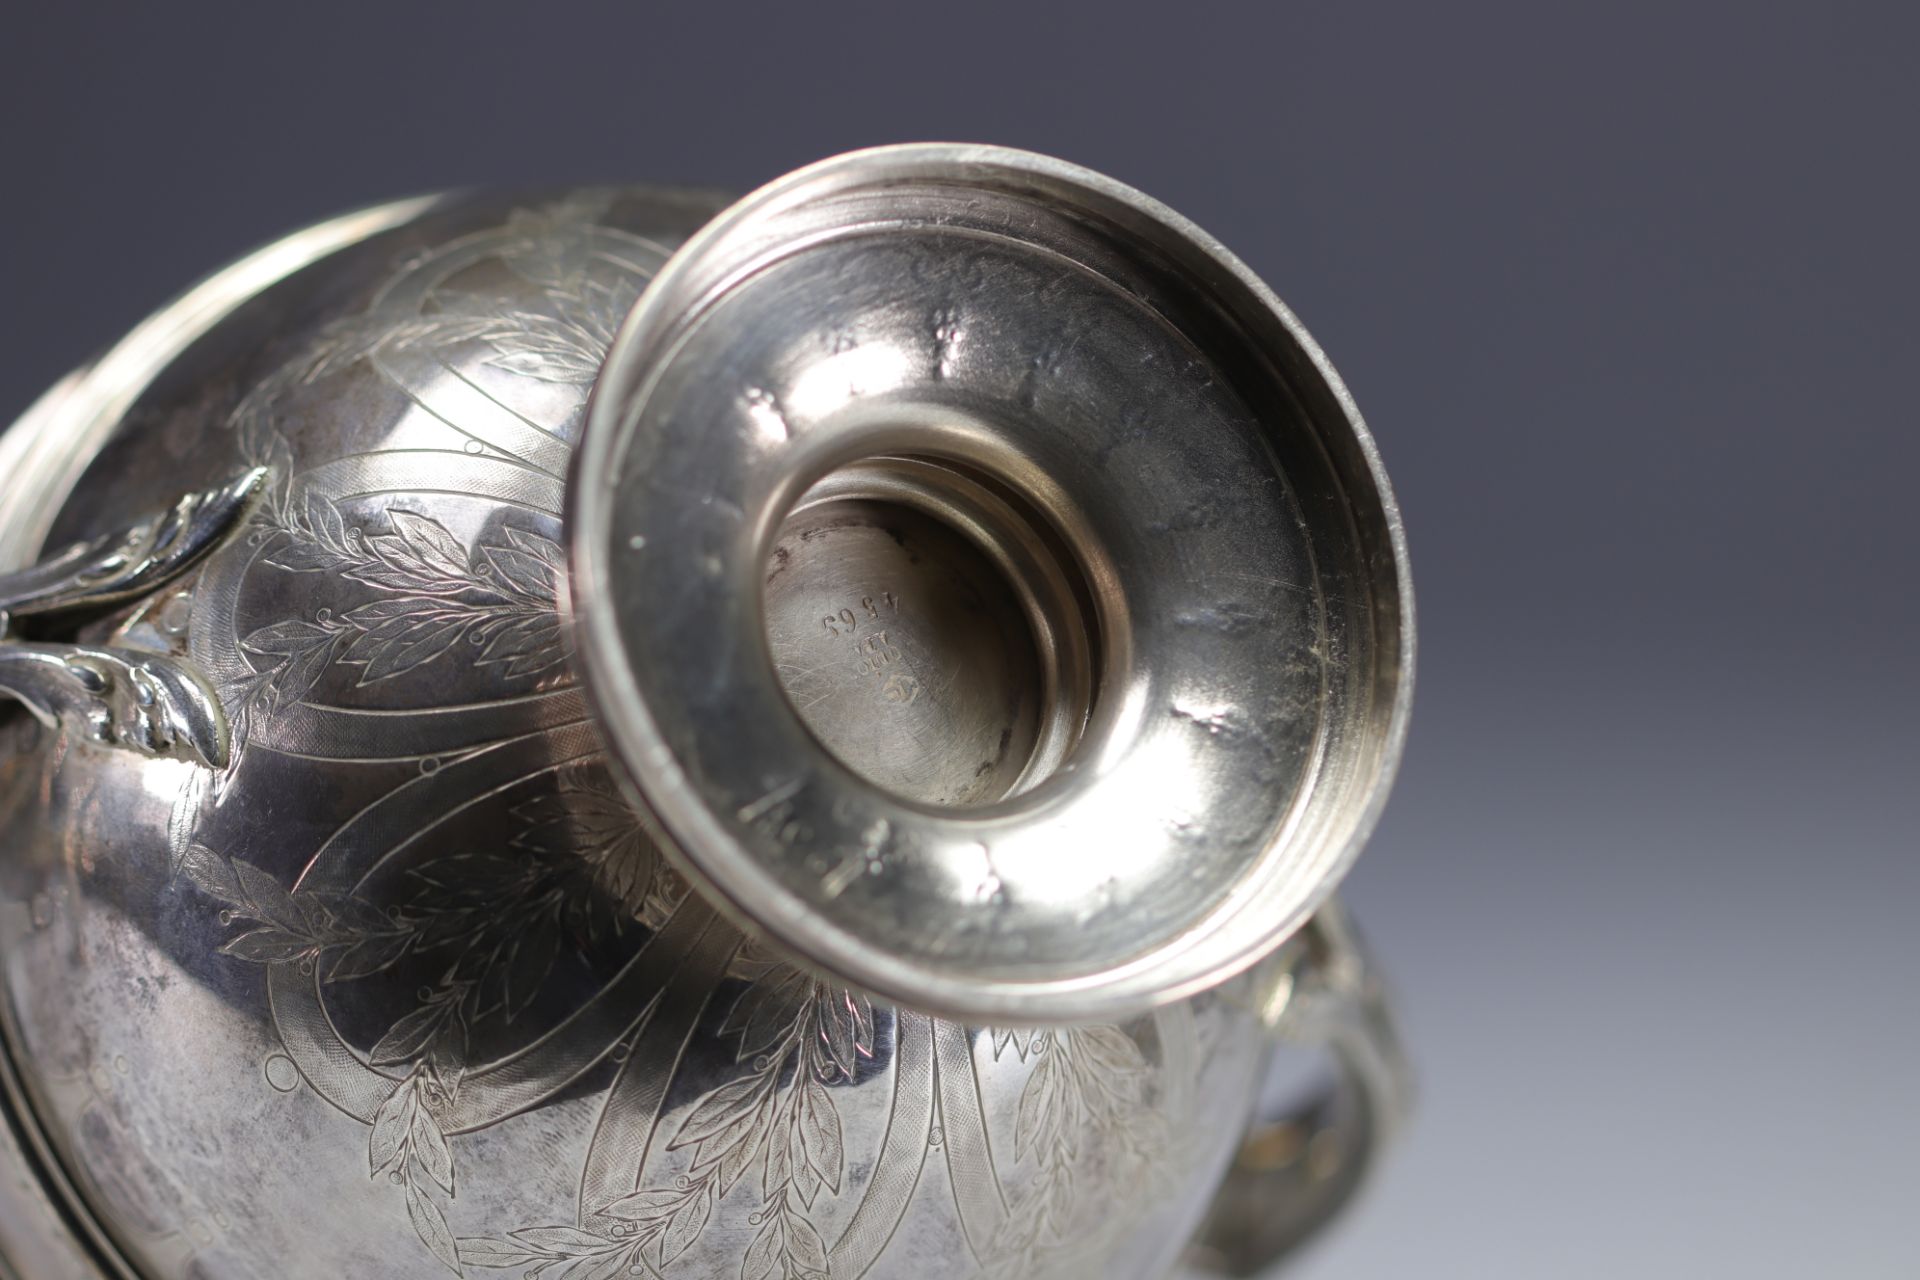 Jean-Baptiste Claude ODIOT a PARIS - Solid silver coffee service. - Image 10 of 11